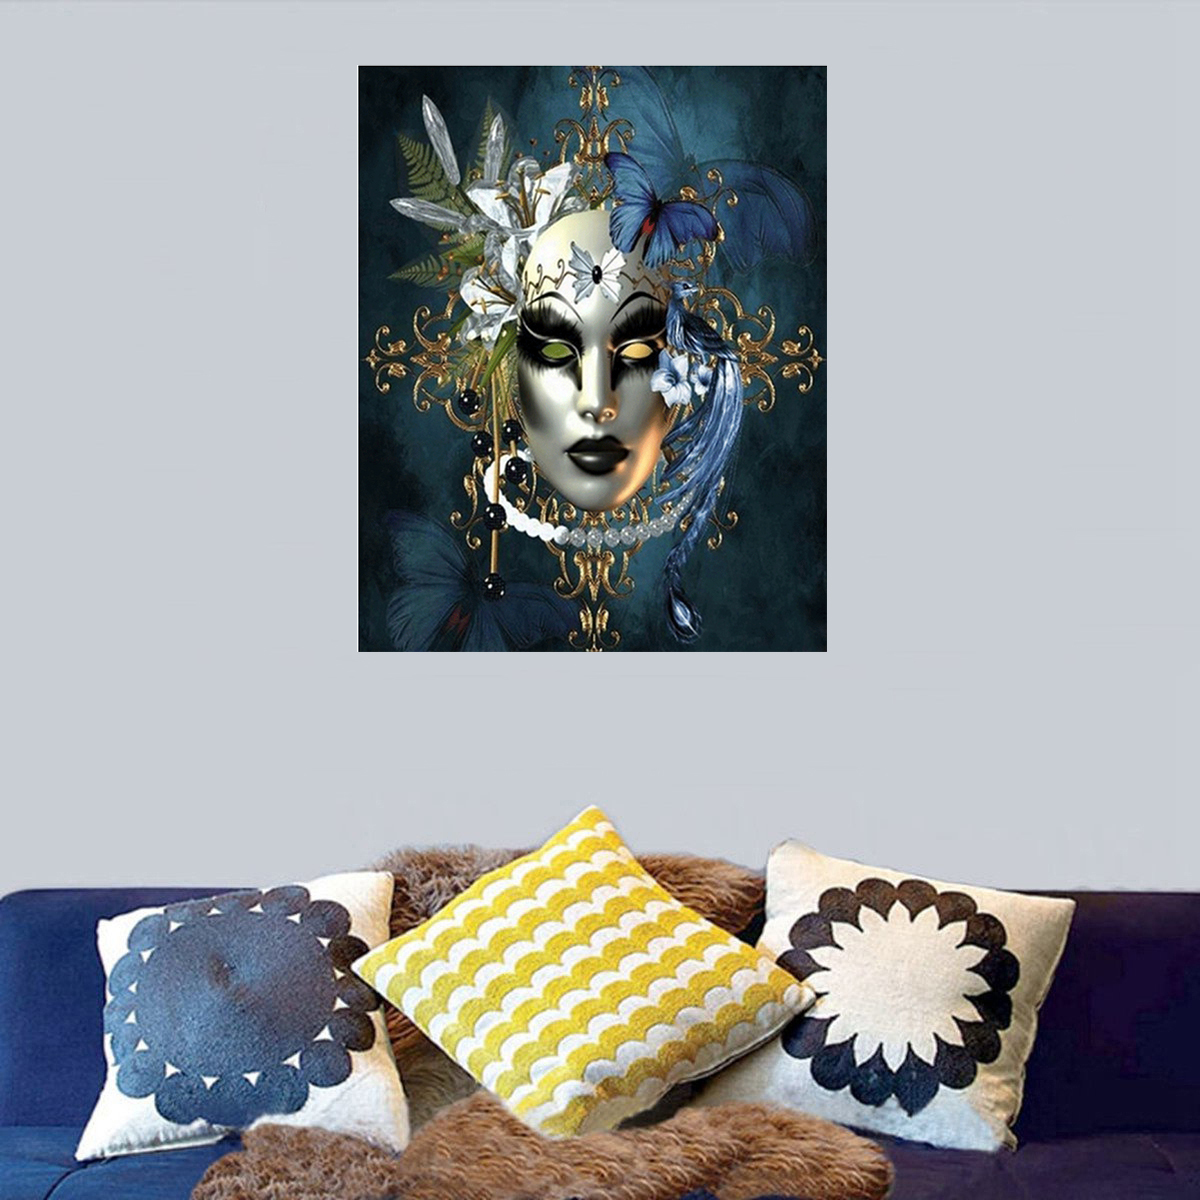 DIY-Diamond-Painted-Mask-5D-Diamond-Wall-Painting-Bedthroom-Home-Hanging-Drawing-Decoration-for-Adul-1744078-9